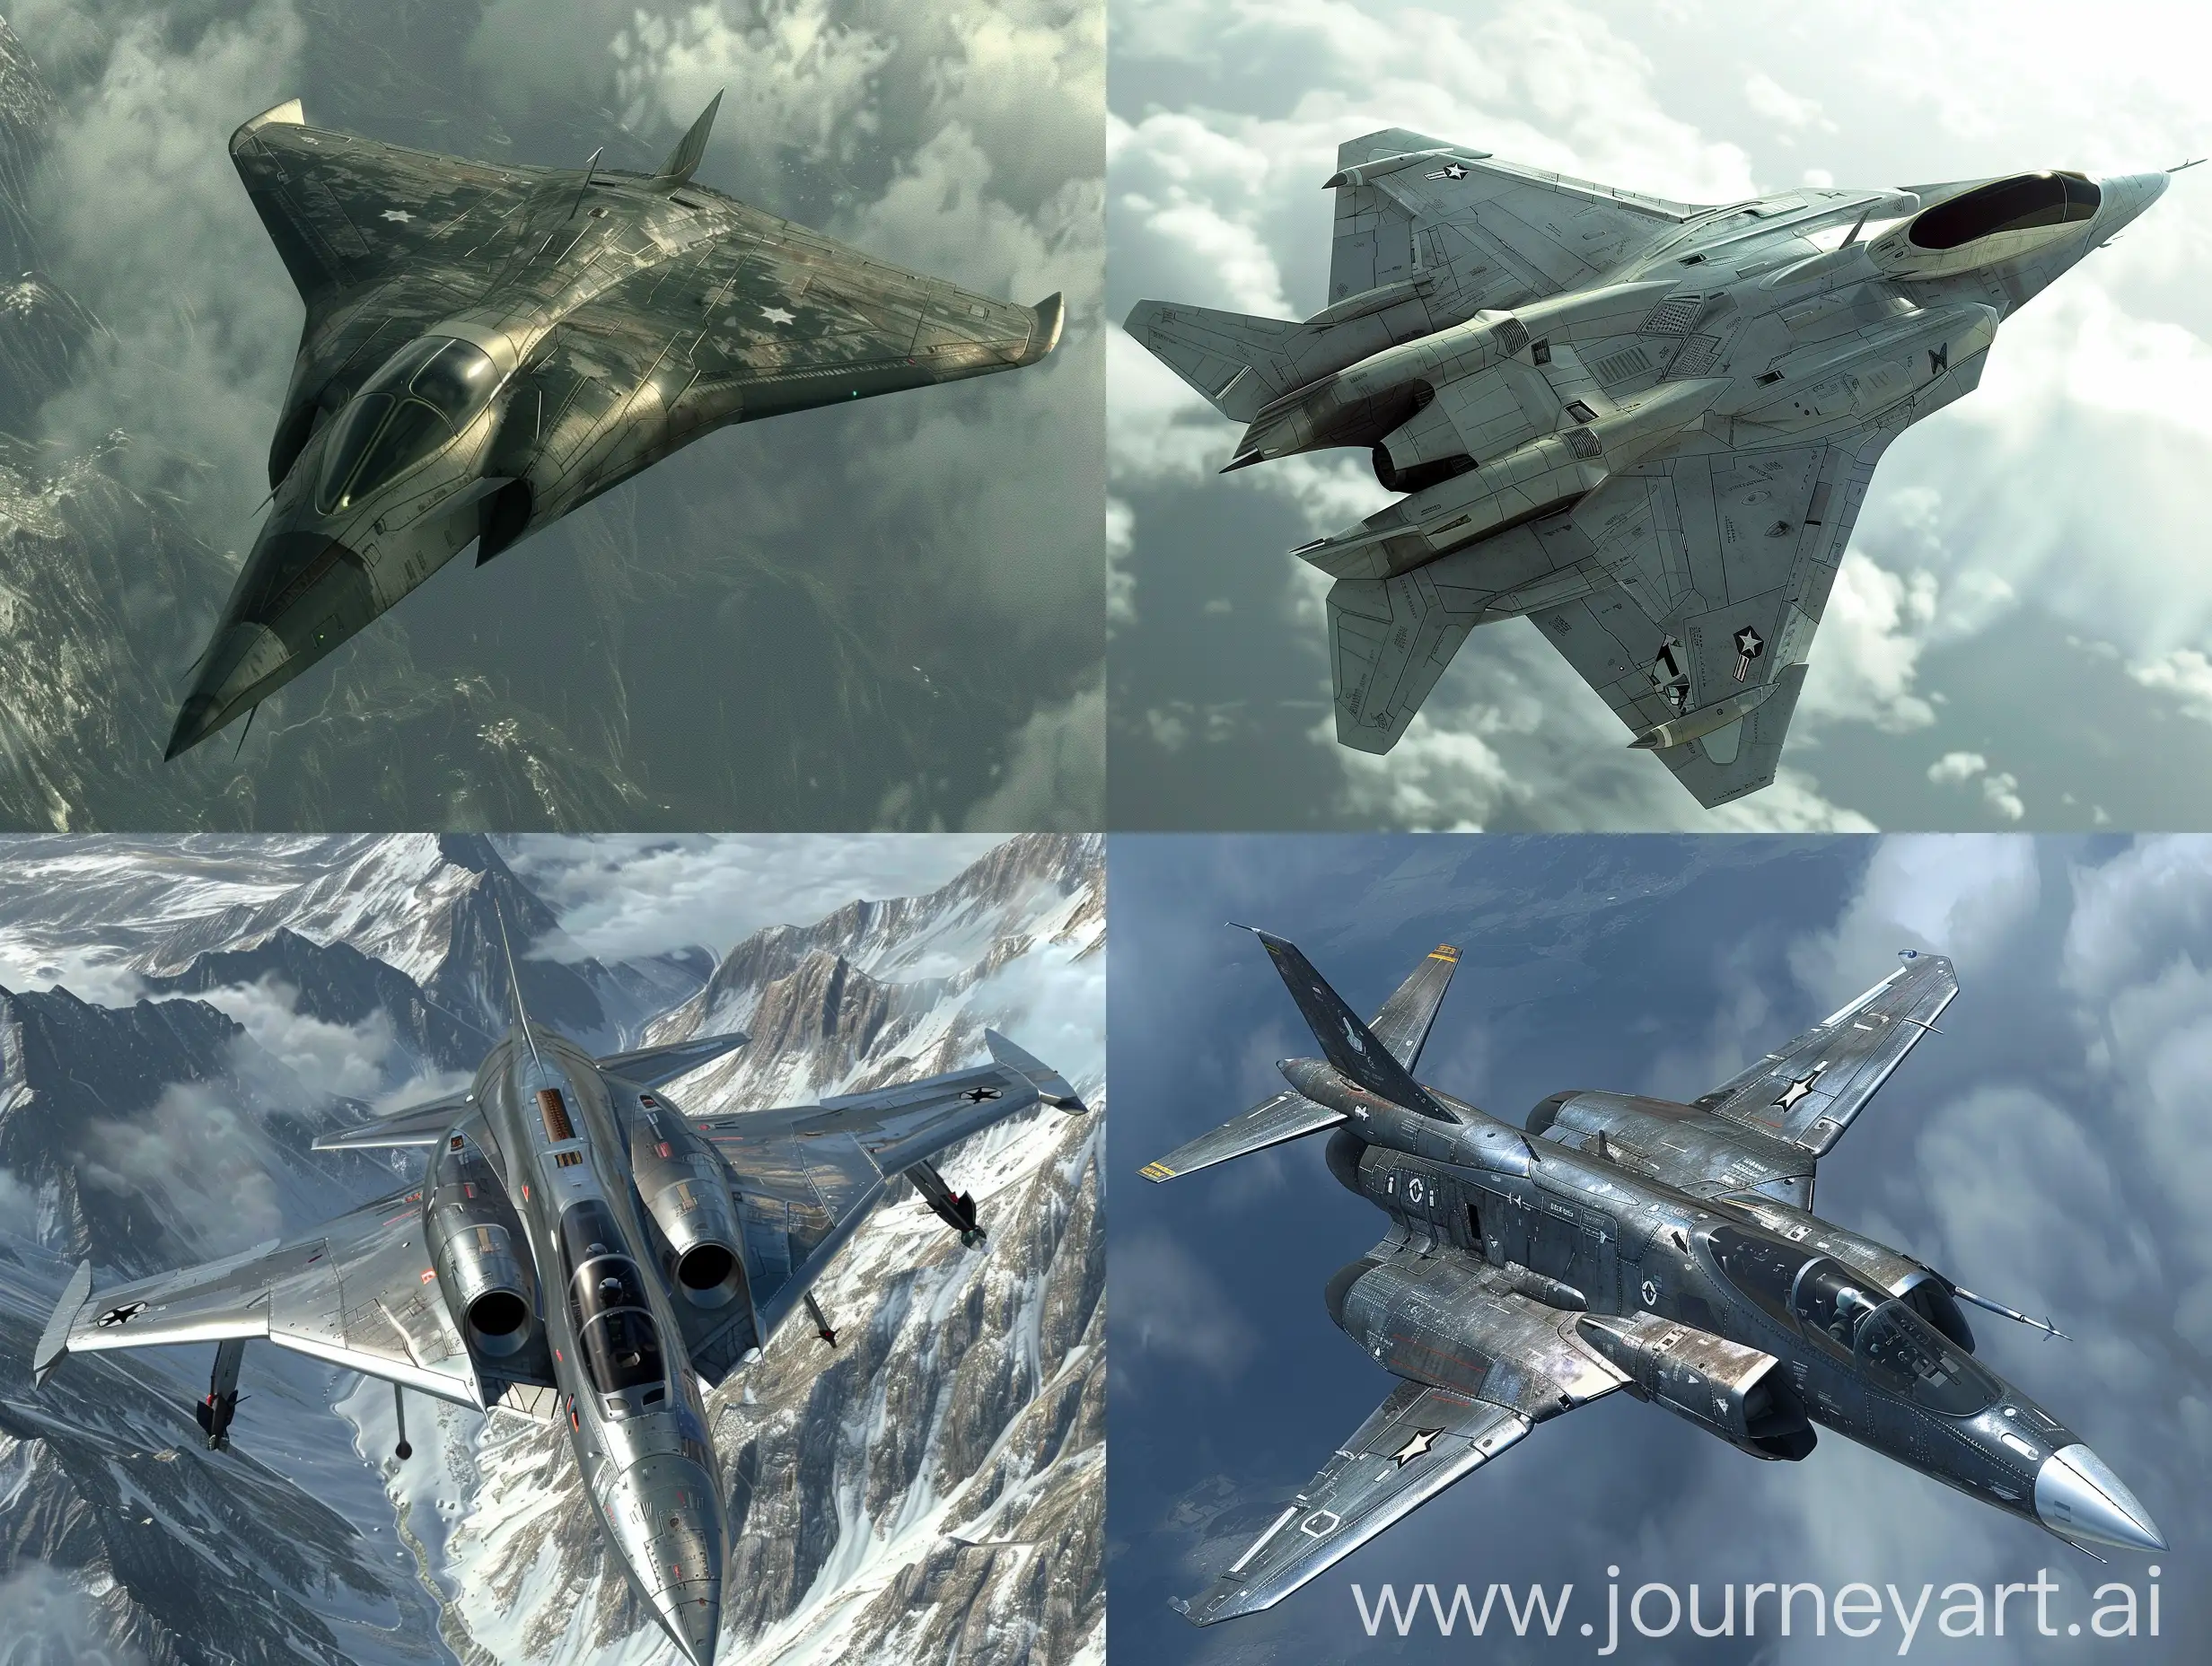 Futuristic-Aircraft-Ace-Combat-3-Electrosphere-Delphinus-in-HighTech-Setting